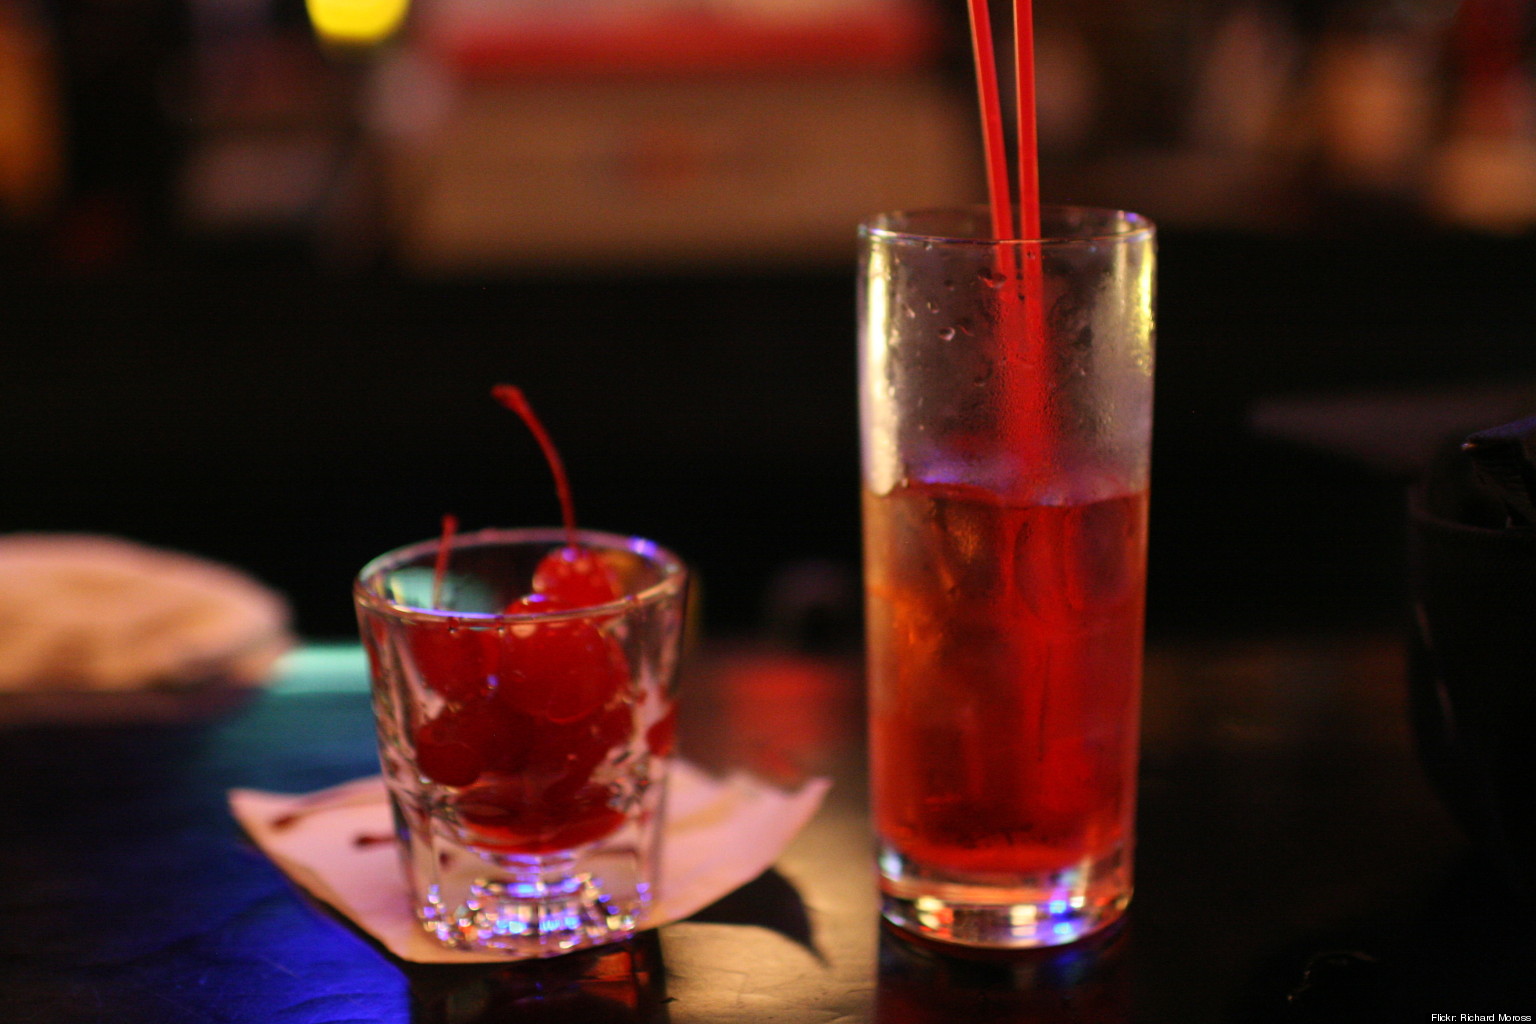 shirley temple alcoholic drink